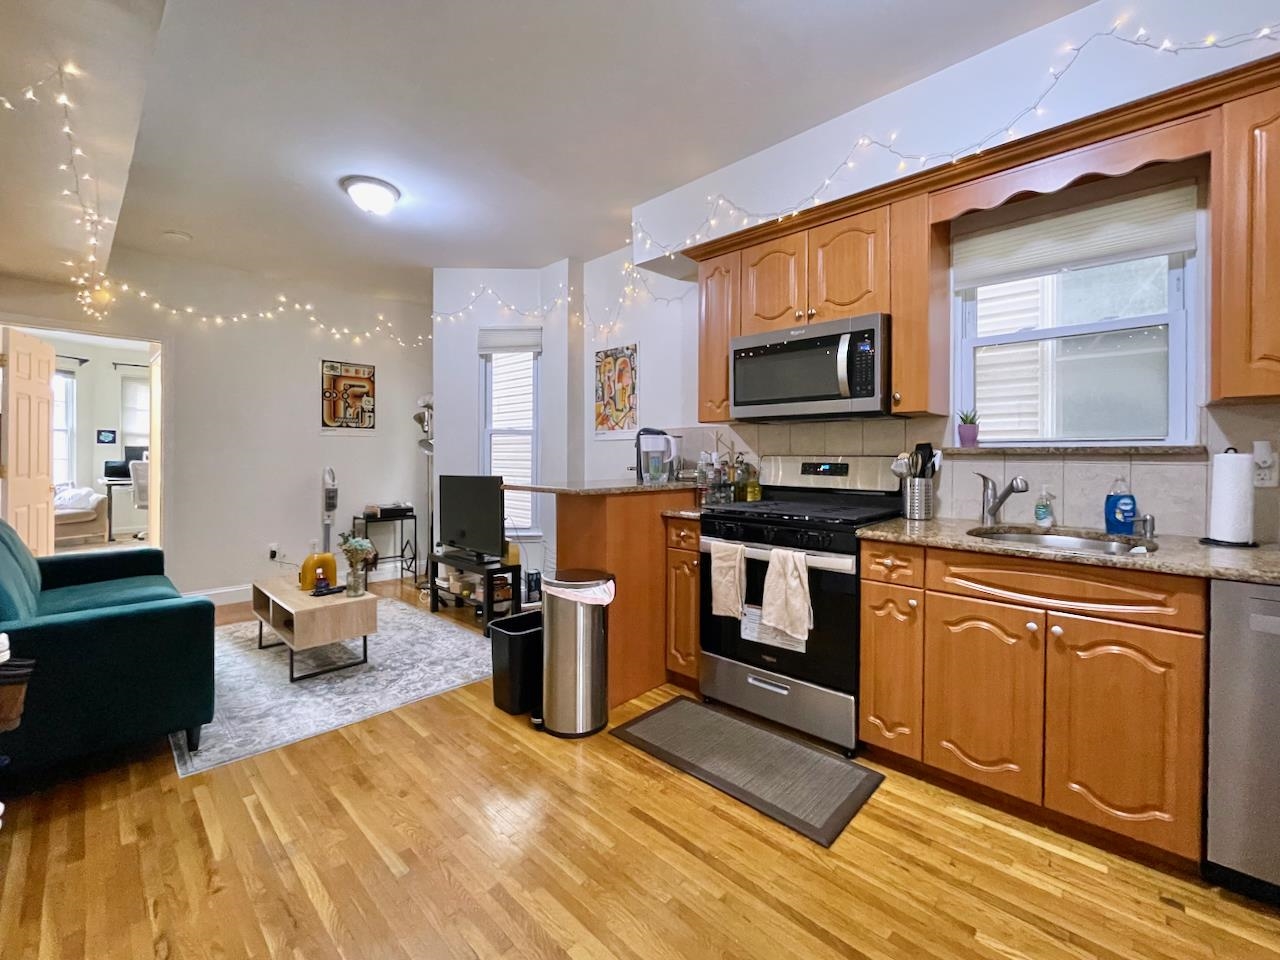 # 240003717 - For Rent in JERSEY CITY - Journal Square NJ